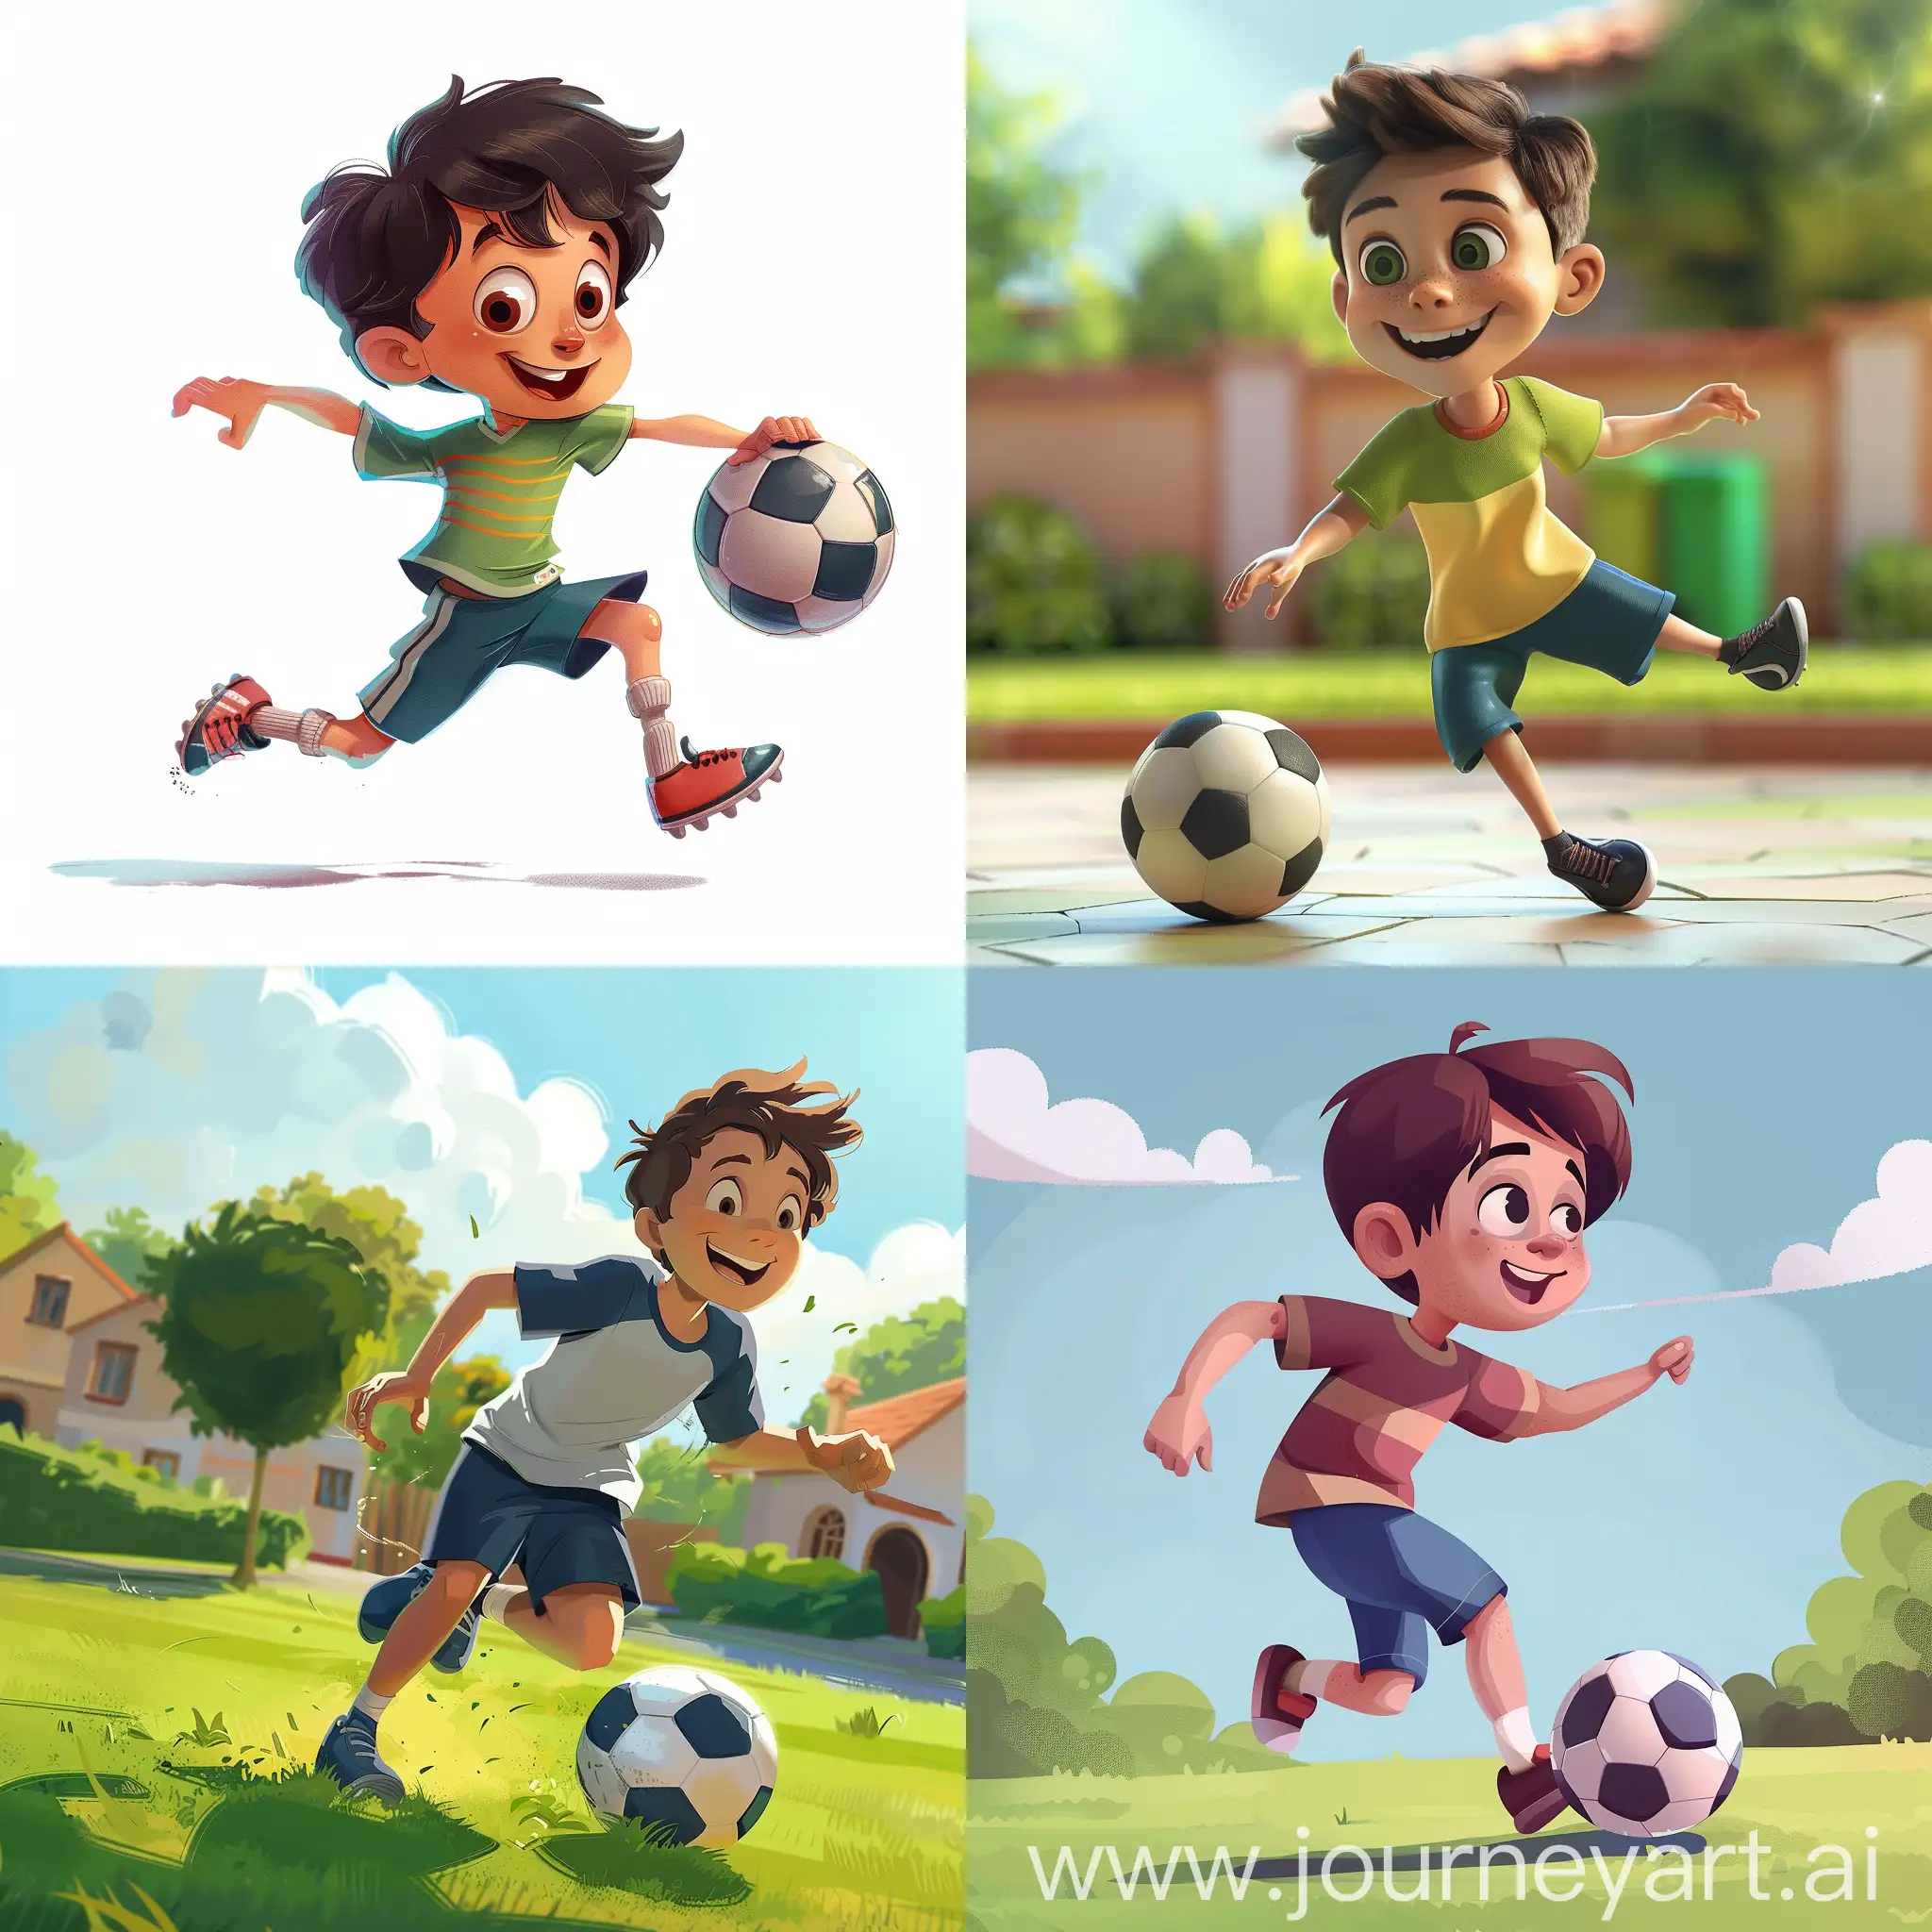 a boy playing football in pixar style